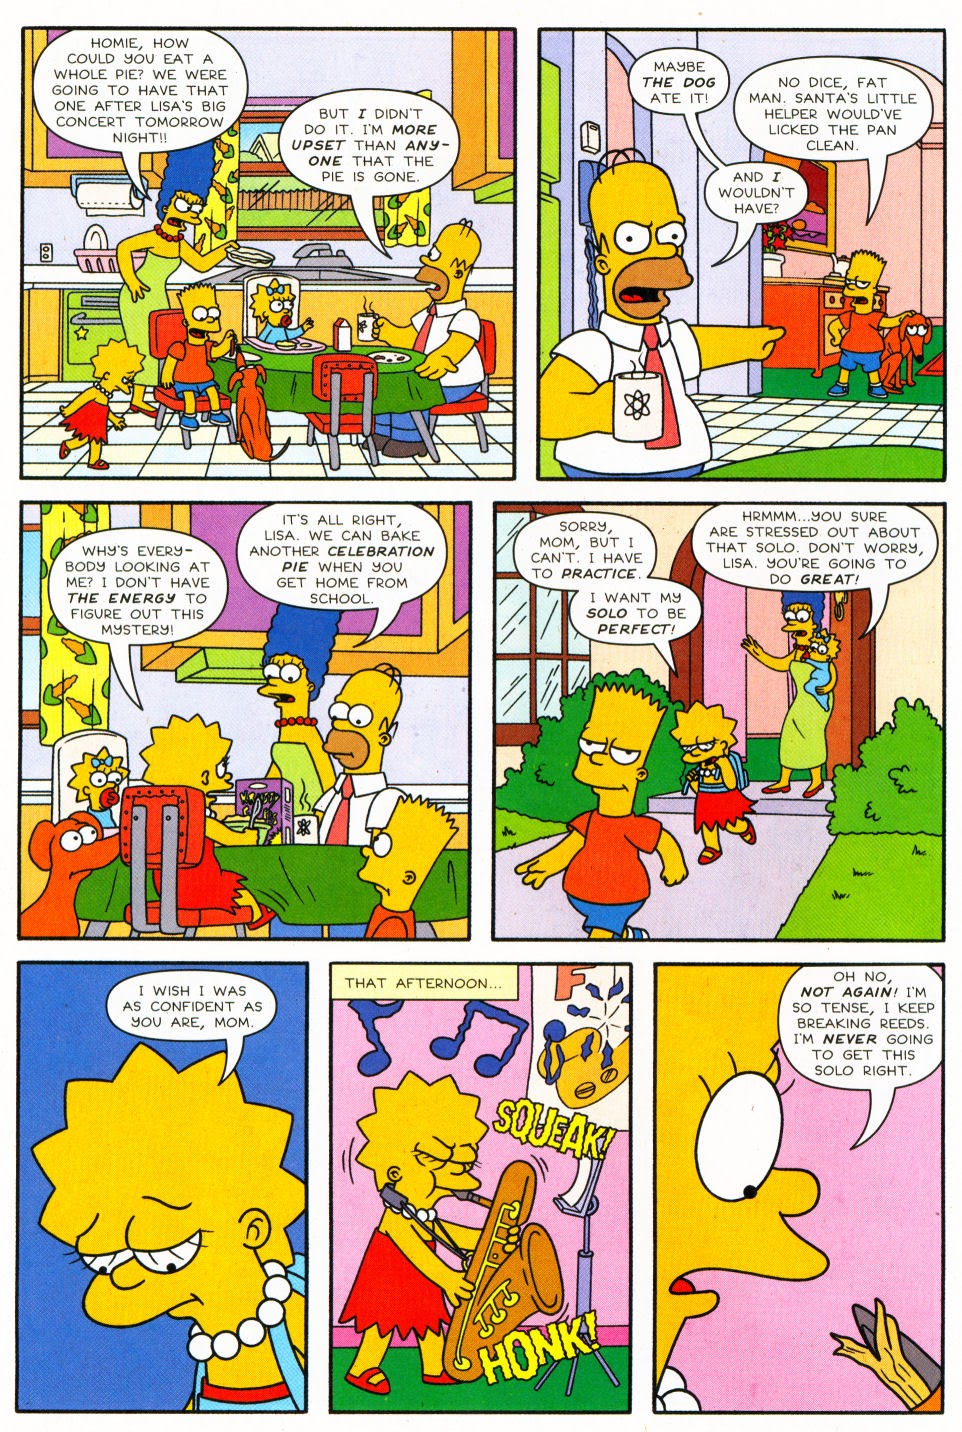 Read online Bart Simpson comic -  Issue #27 - 13